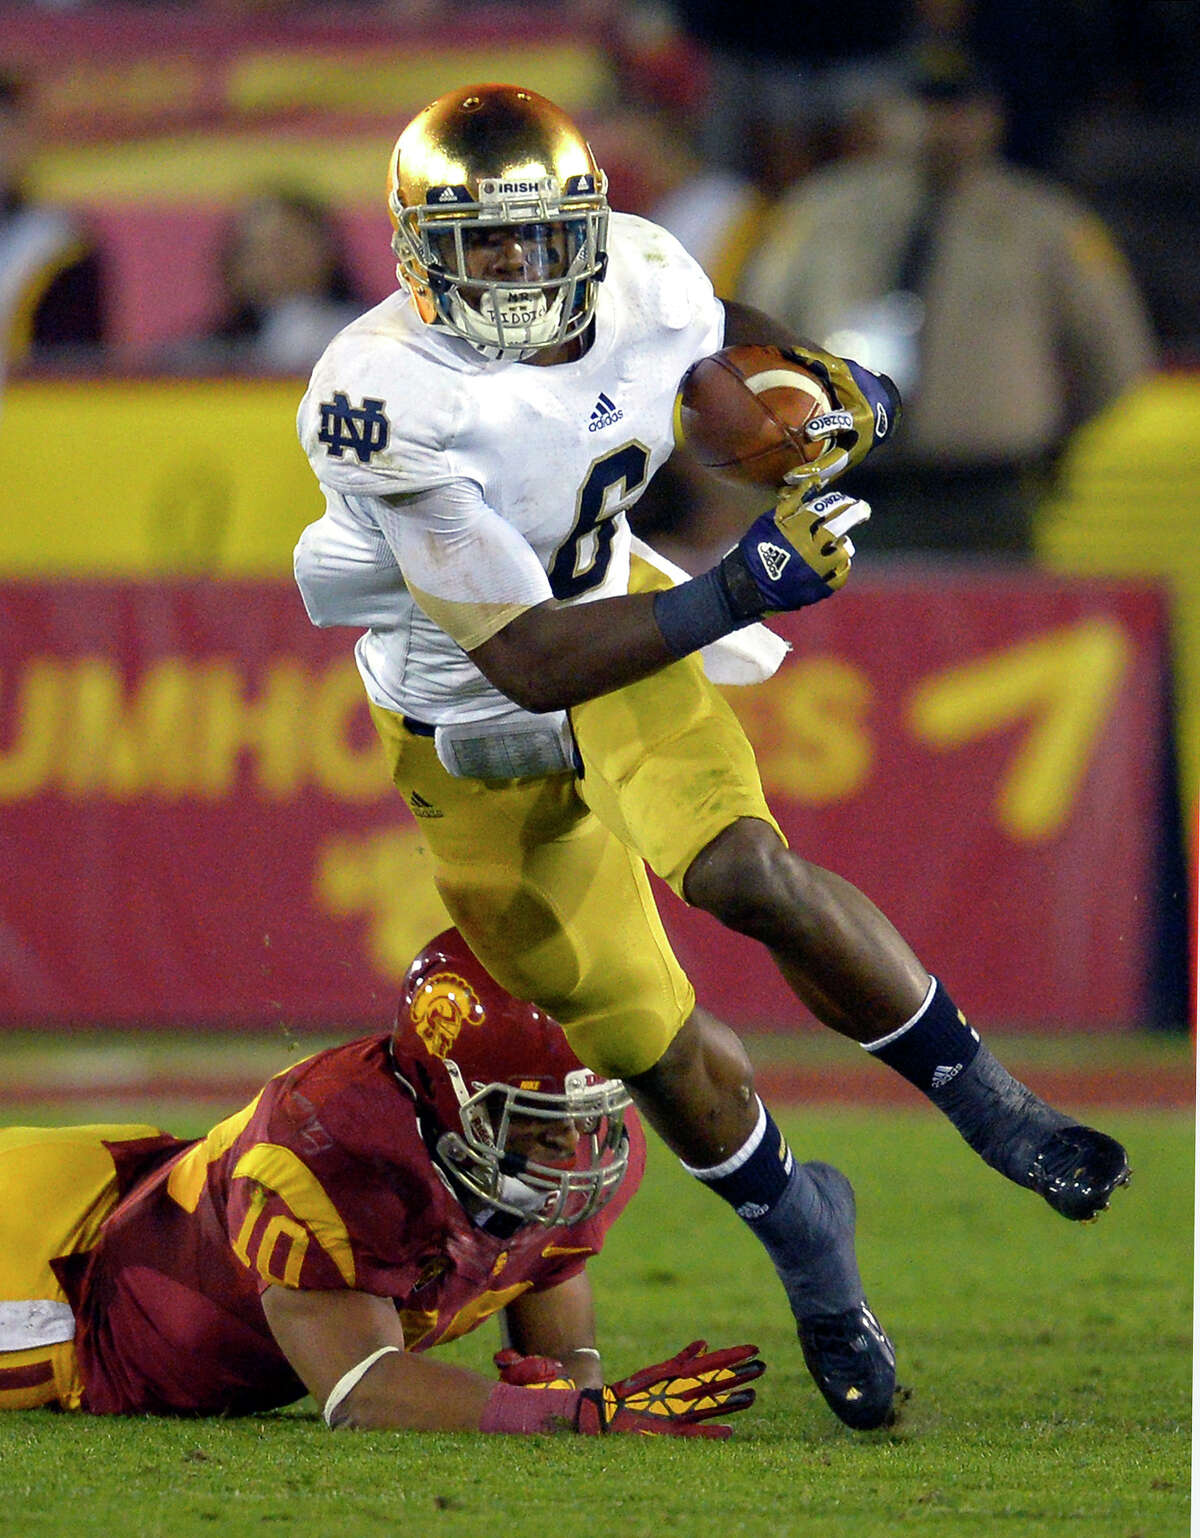 Notre Dame running back Theo Riddick, left, runs the ball as Southern California linebacker Hayes Pullard during the first half of their NCAA college football game, Saturday, Nov. 24, 2012, in Los Angeles. (AP Photo/Mark J. Terrill)